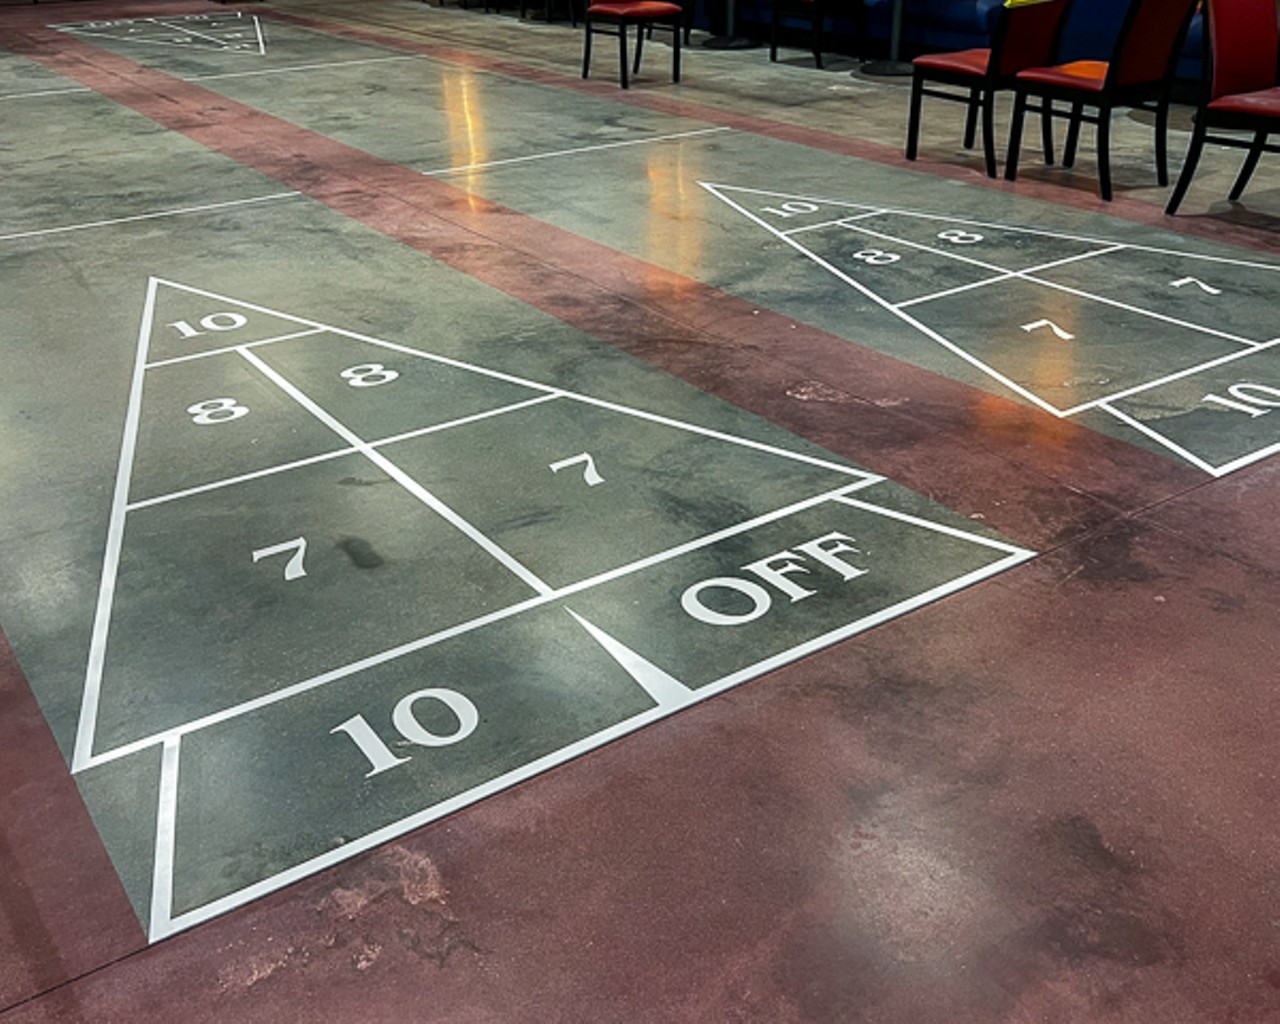 Who doesn't like shuffleboard? There are two full-sized courts.